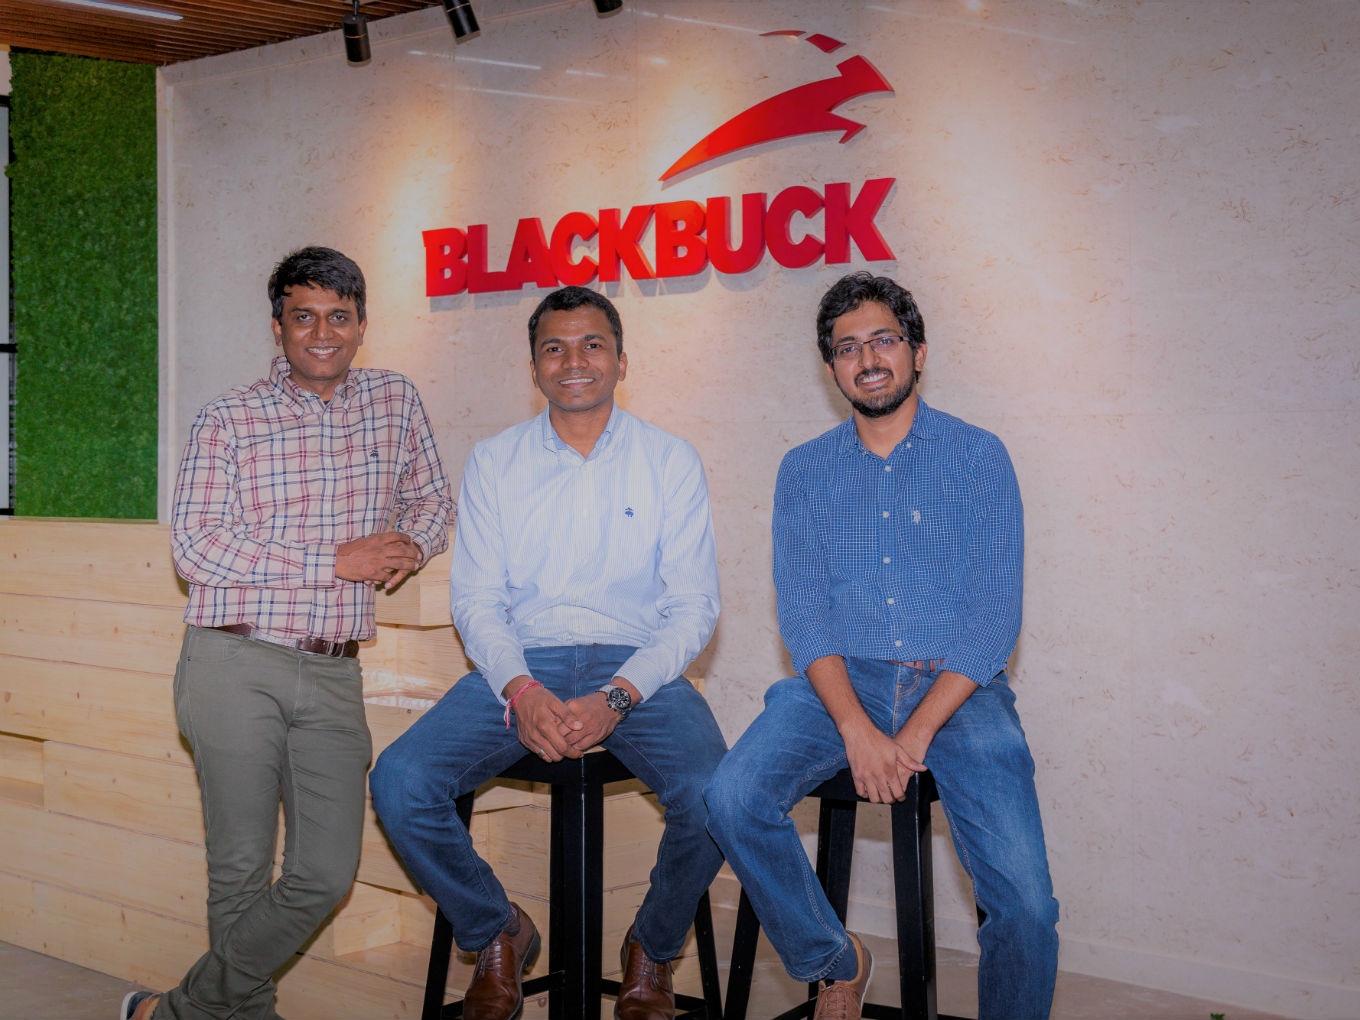 BlackBuck Closes Series D Round At $150 Mn Led By Goldman Sachs, Accel